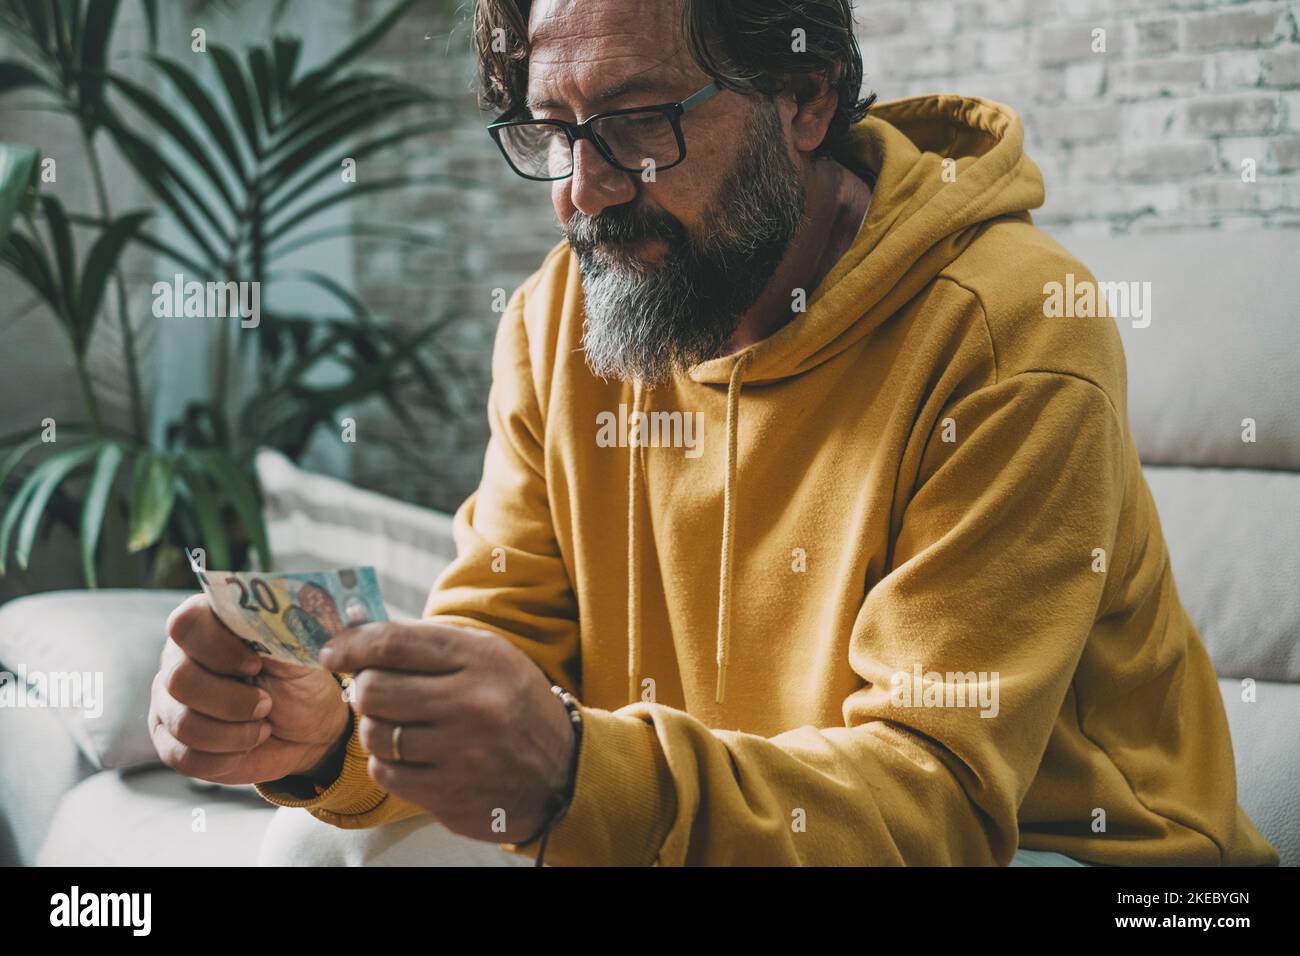 Economy and money people problem concept. Man holding cash banknote with worried expression on face. Mature caucasian man looking last 20 euros sitting on the sofa. Real life Cash and bill payments Stock Photo